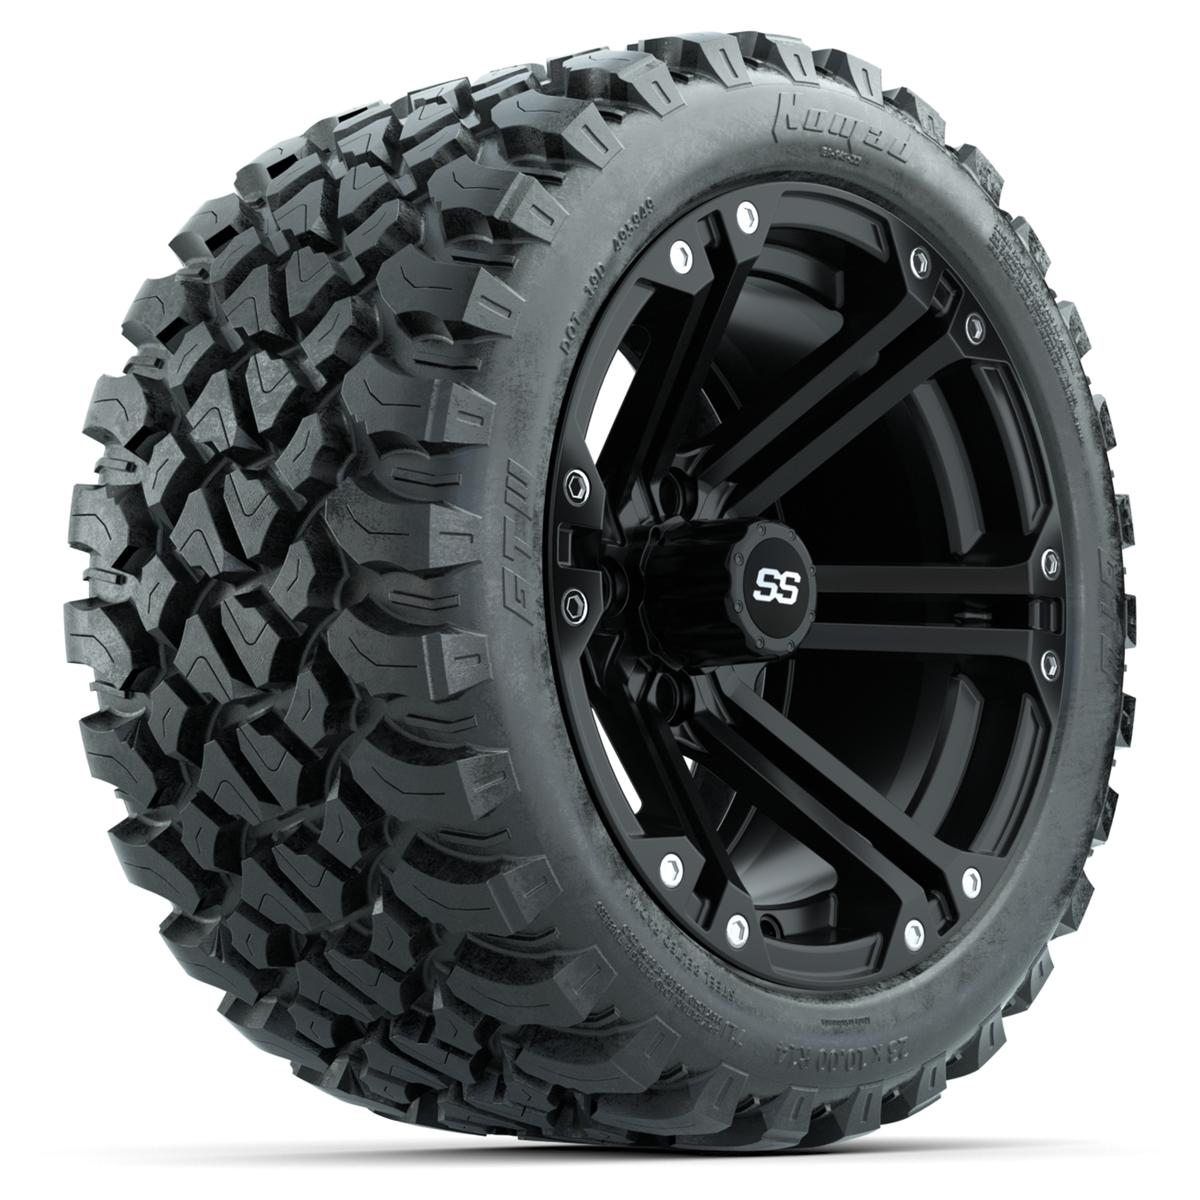 Set of (4) 14 in GTW Specter Wheels with 23x10-14 GTW Nomad All-Terrain Tires